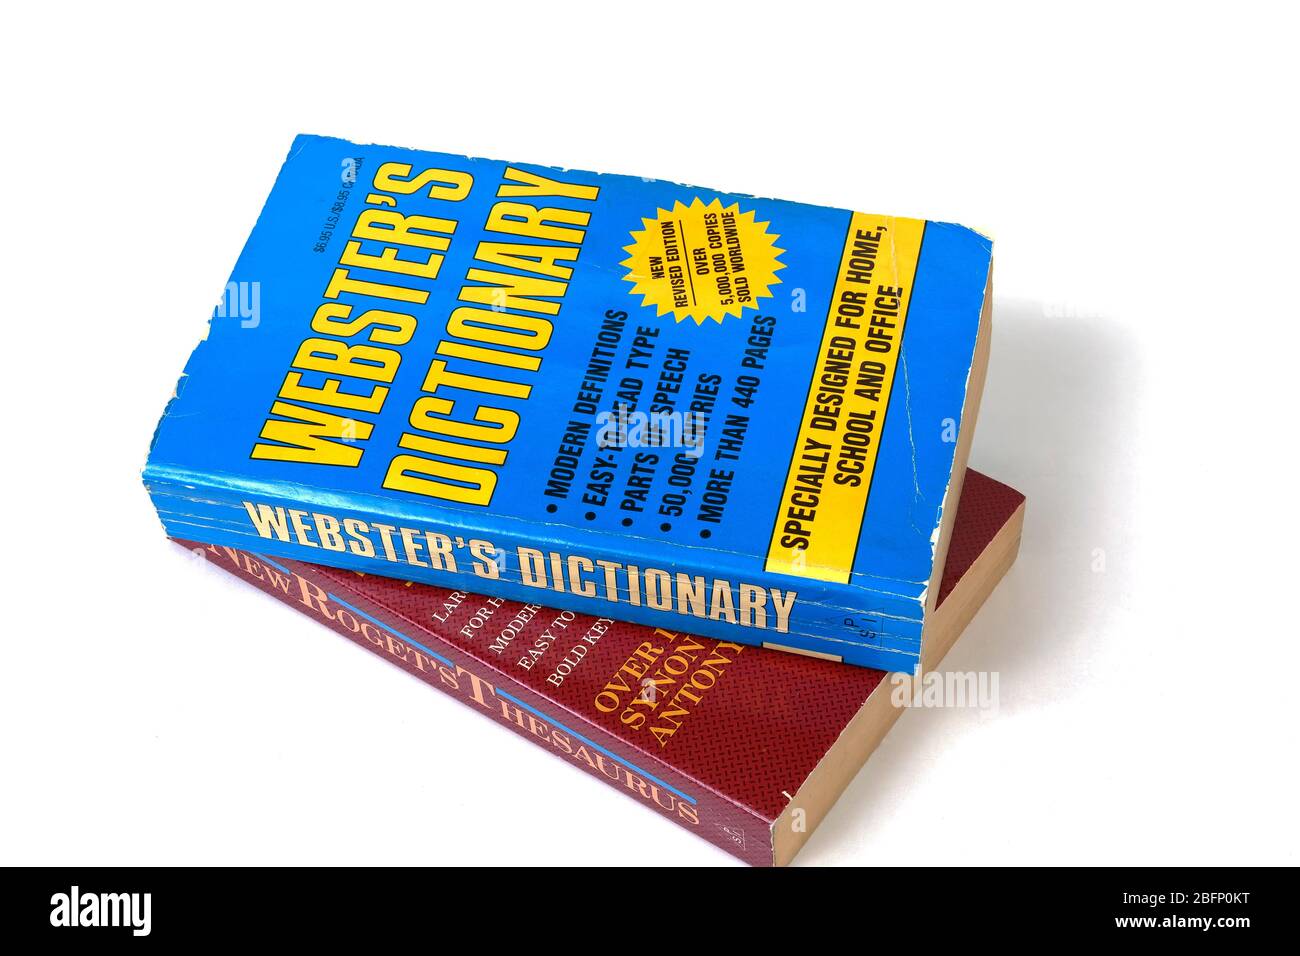 Paperback  English Dictionary and Thesaurus isolated on a pure white background. Stock Photo